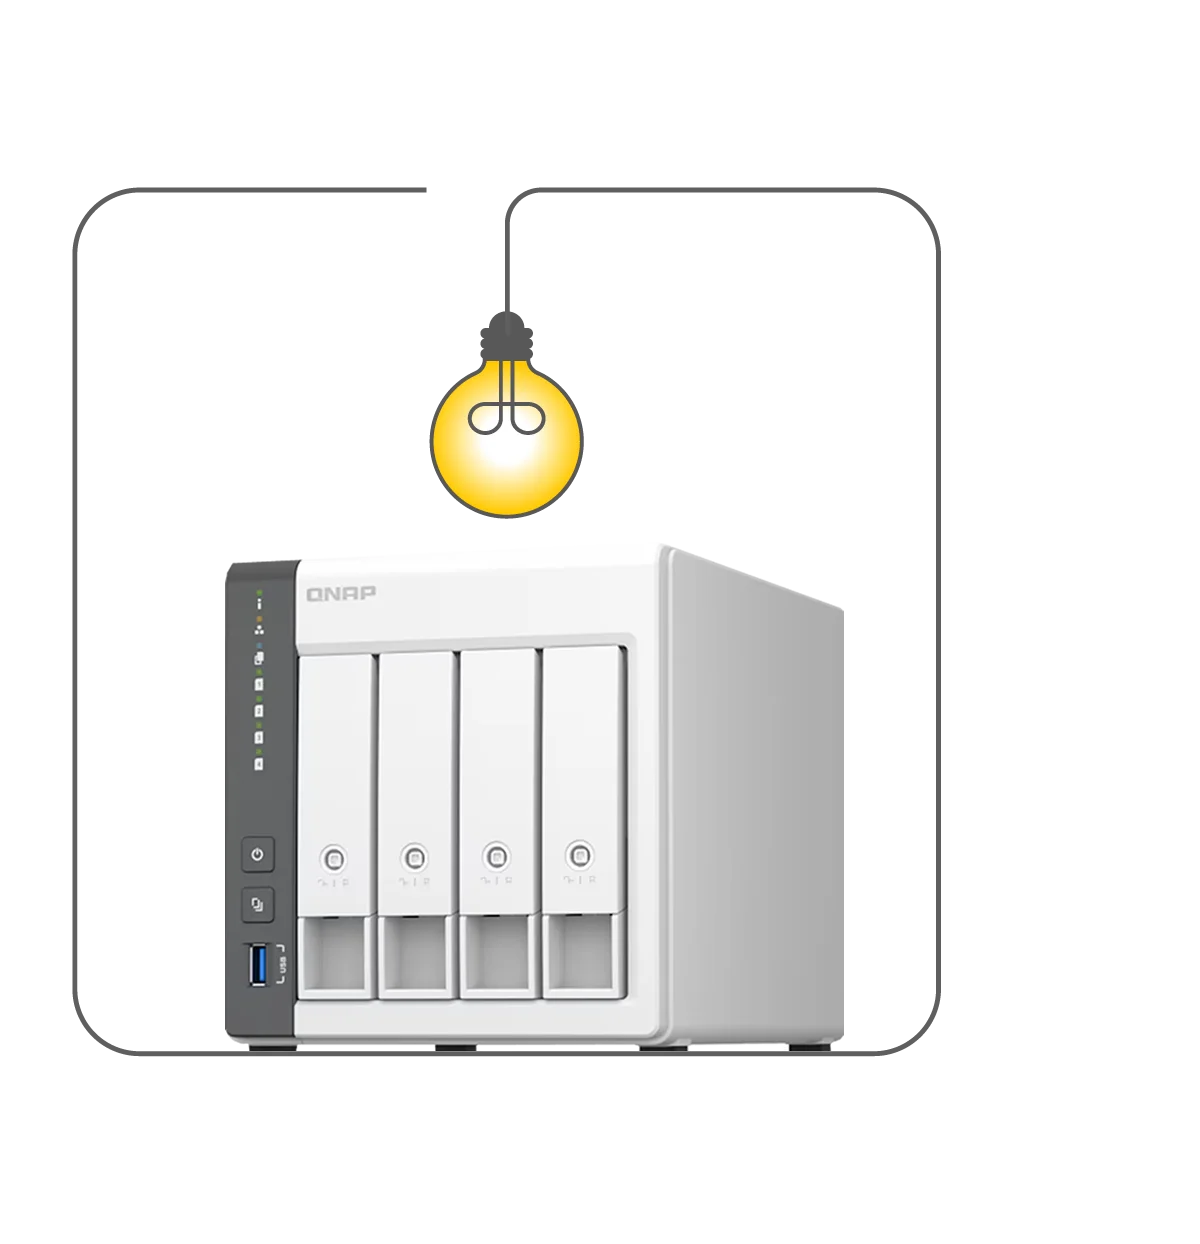 Powerful data processing synology nas